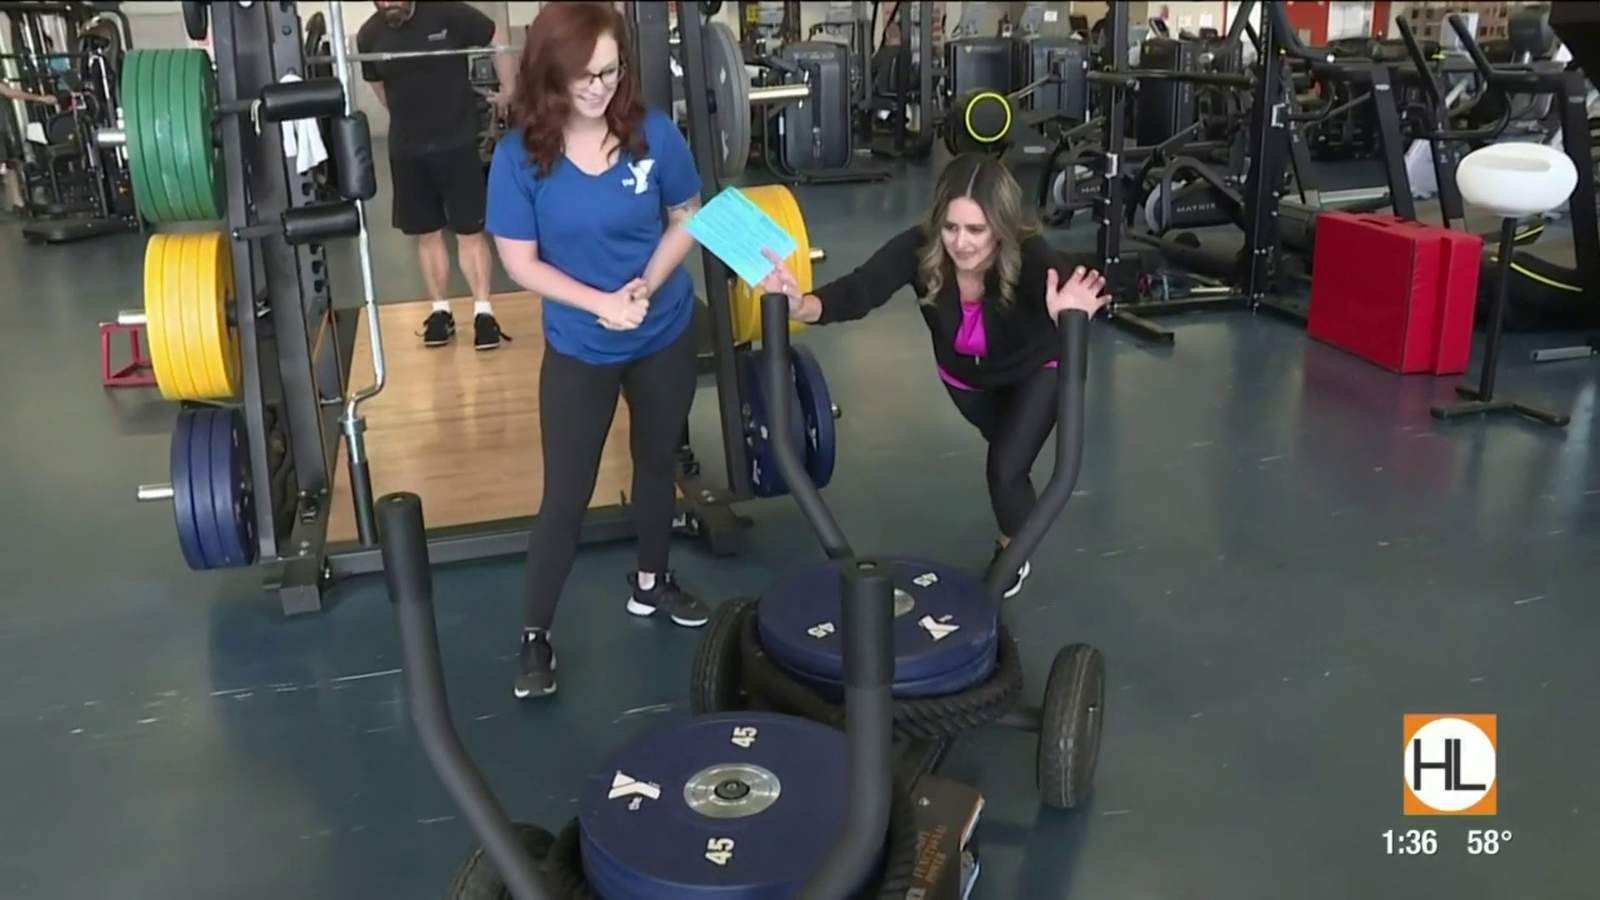 Getting healthy in the new year is easy at the YMCA of Greater Houston | HOUSTON LIFE | KPRC 2